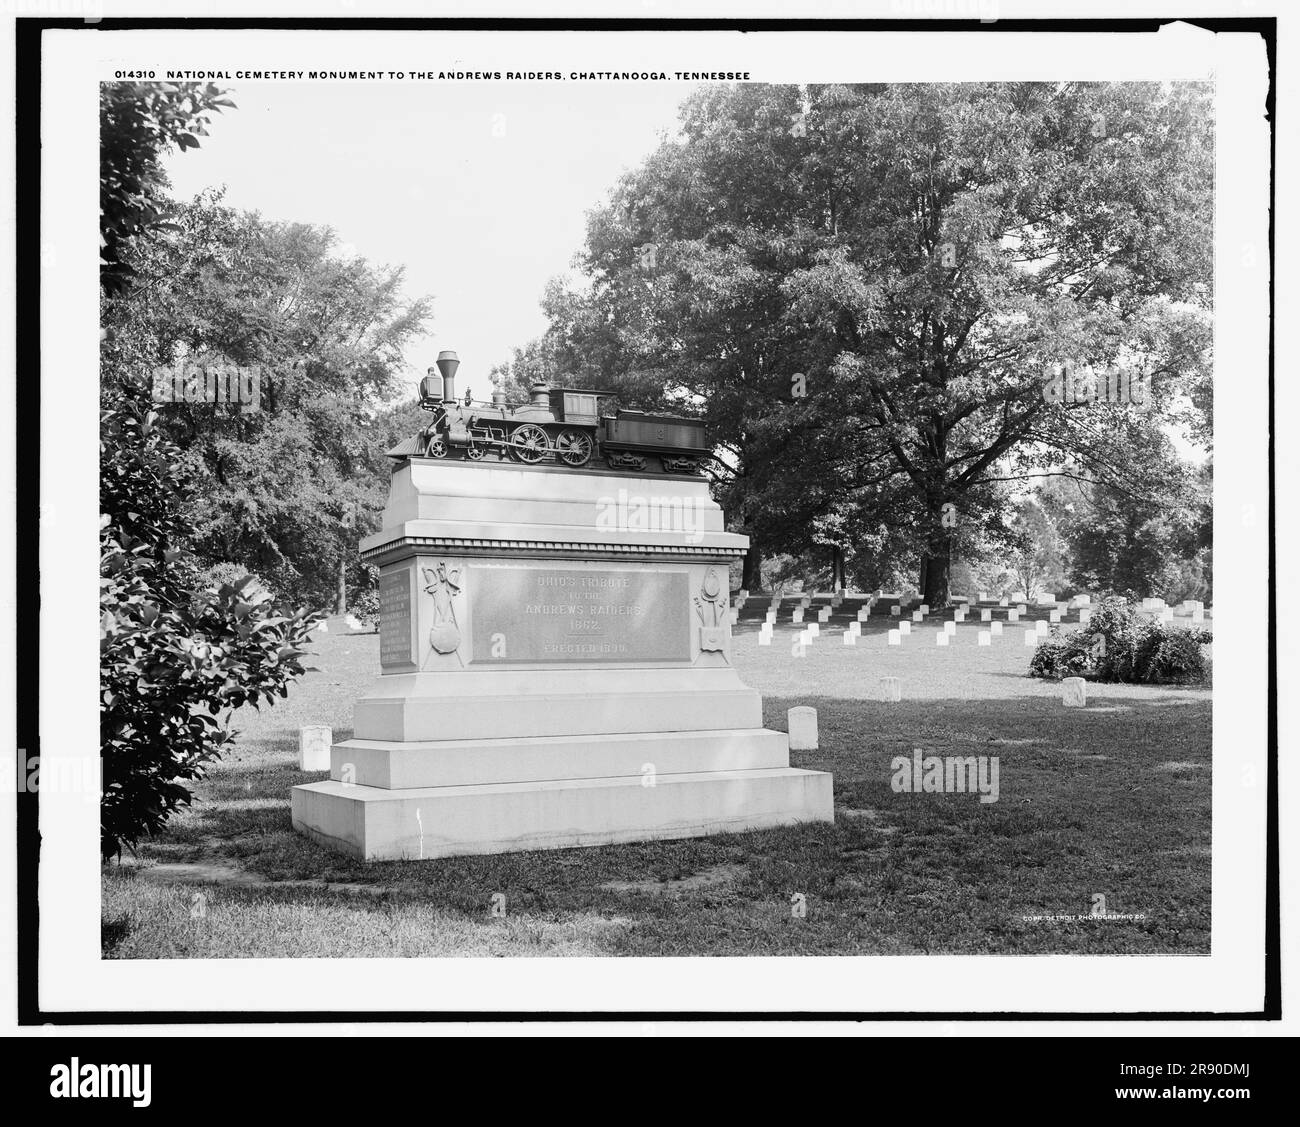 National Cemetery, monument to the Andrews Raiders, Chattanooga, Tennessee, c1902. Stock Photo